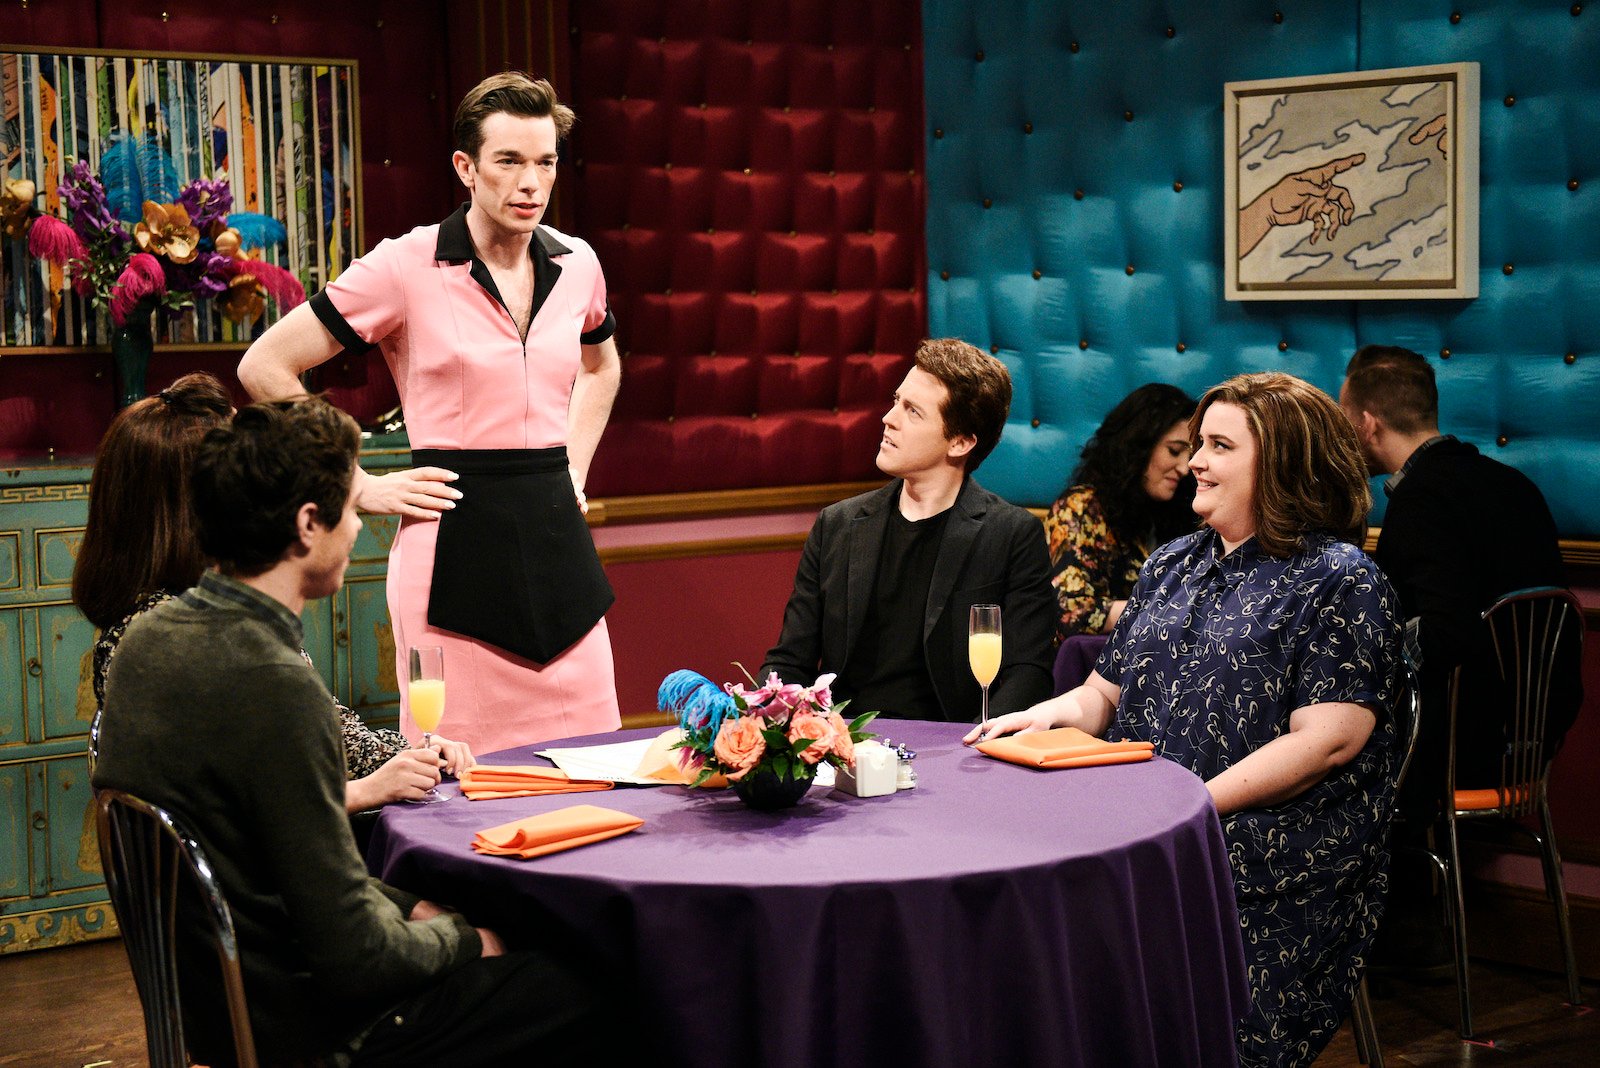 John Mulaney on 'SNL' dressed in a pink waitress costume stands next to a table of people with hands on hips. 